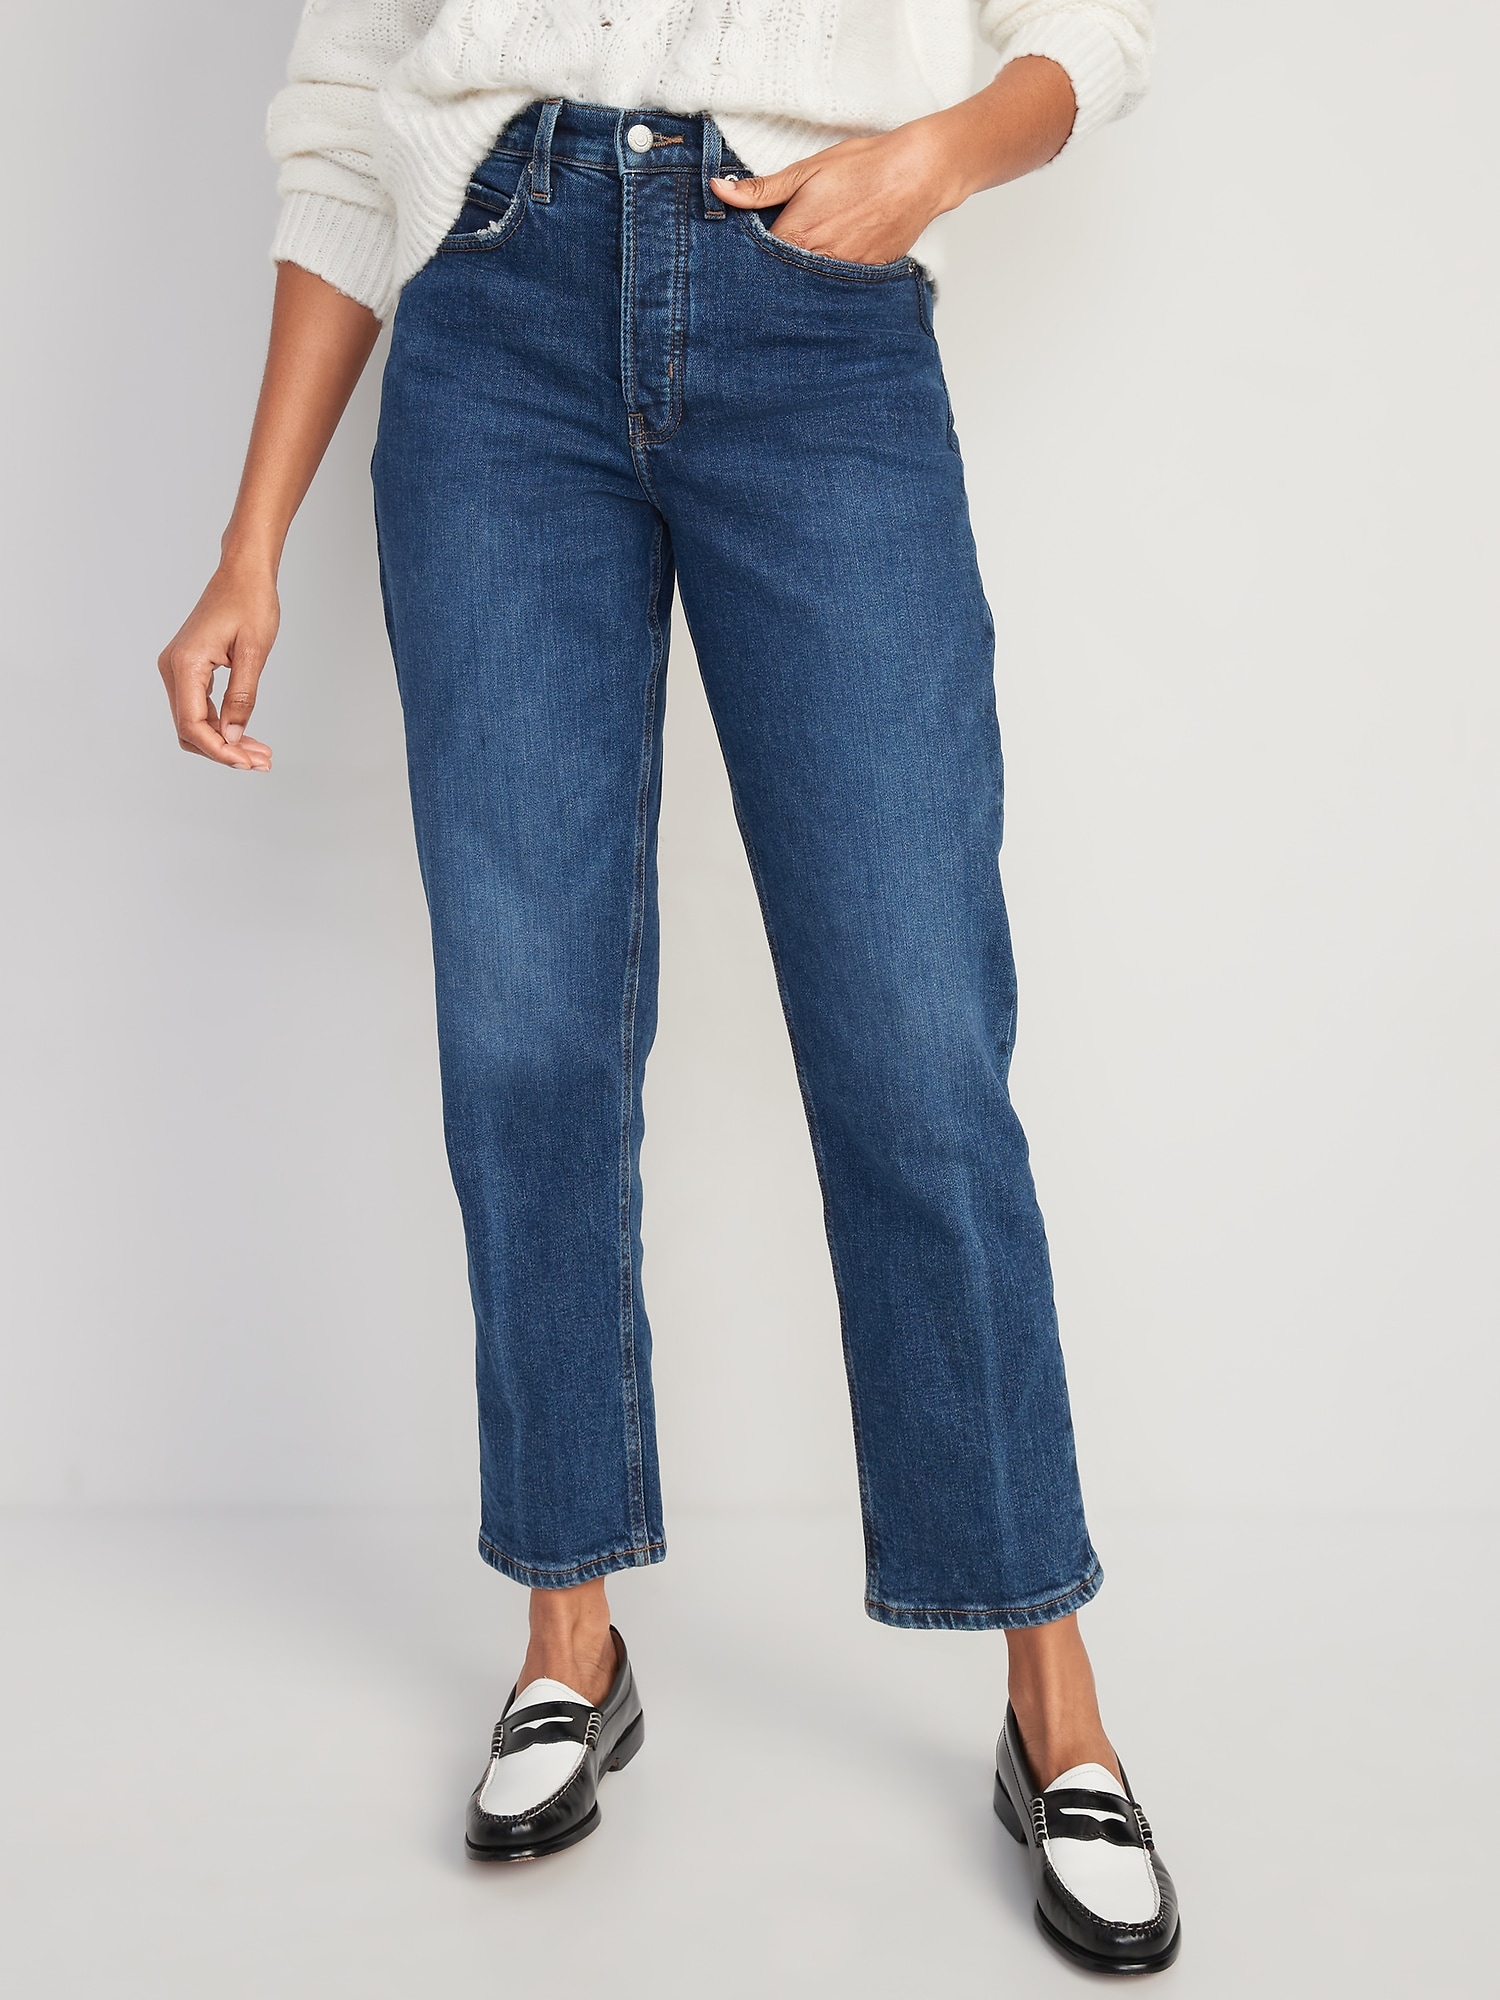 Curvy Extra High-Waisted Button-Fly Sky-Hi Straight Jeans for Old Navy